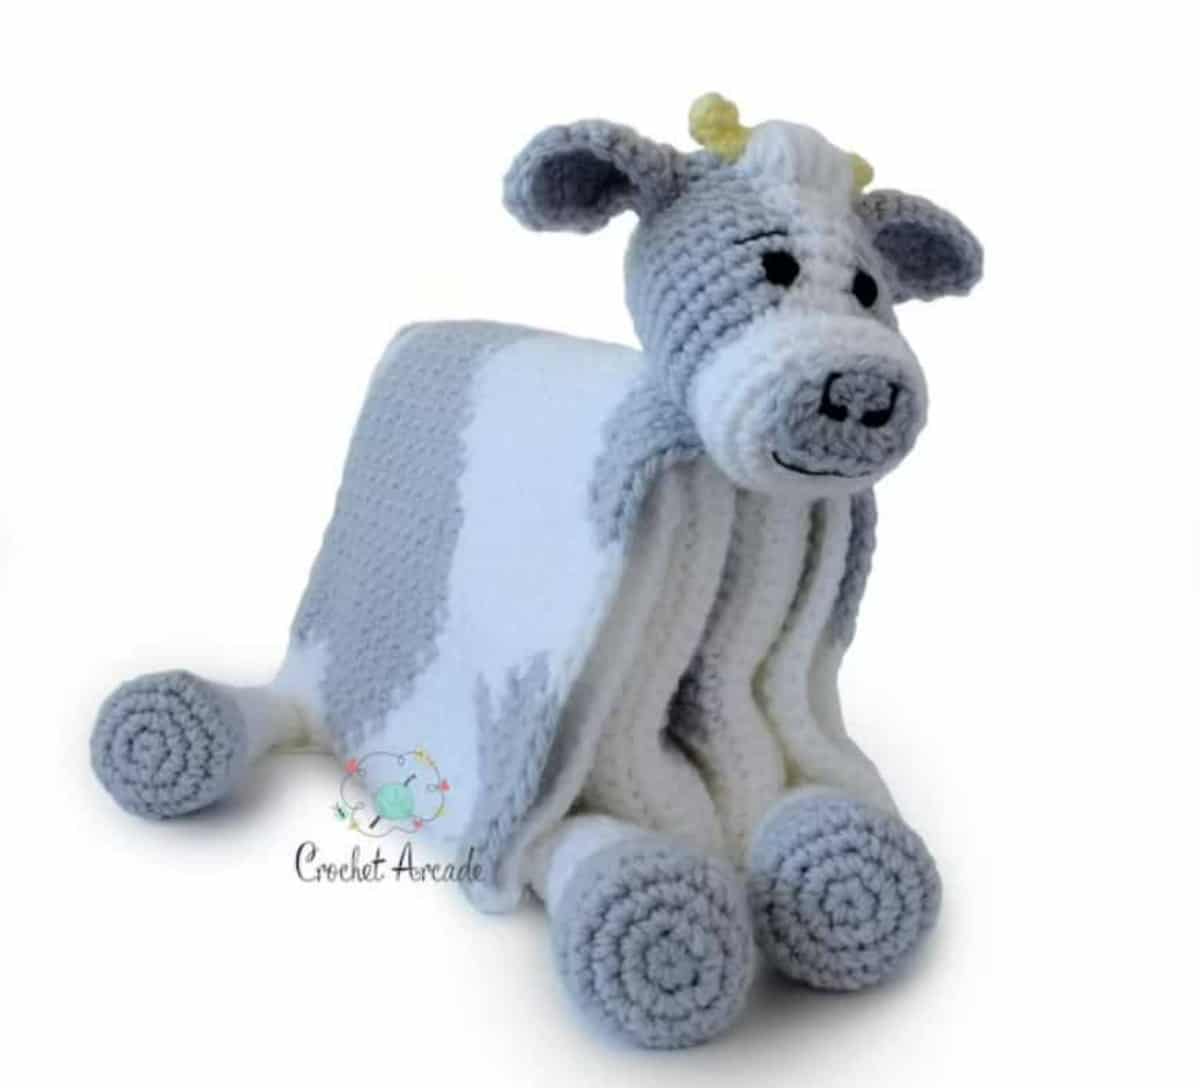 Blue, gray, and white crochet blanket with a stuffed cow's head and legs, folded to look like the cow is sitting down.